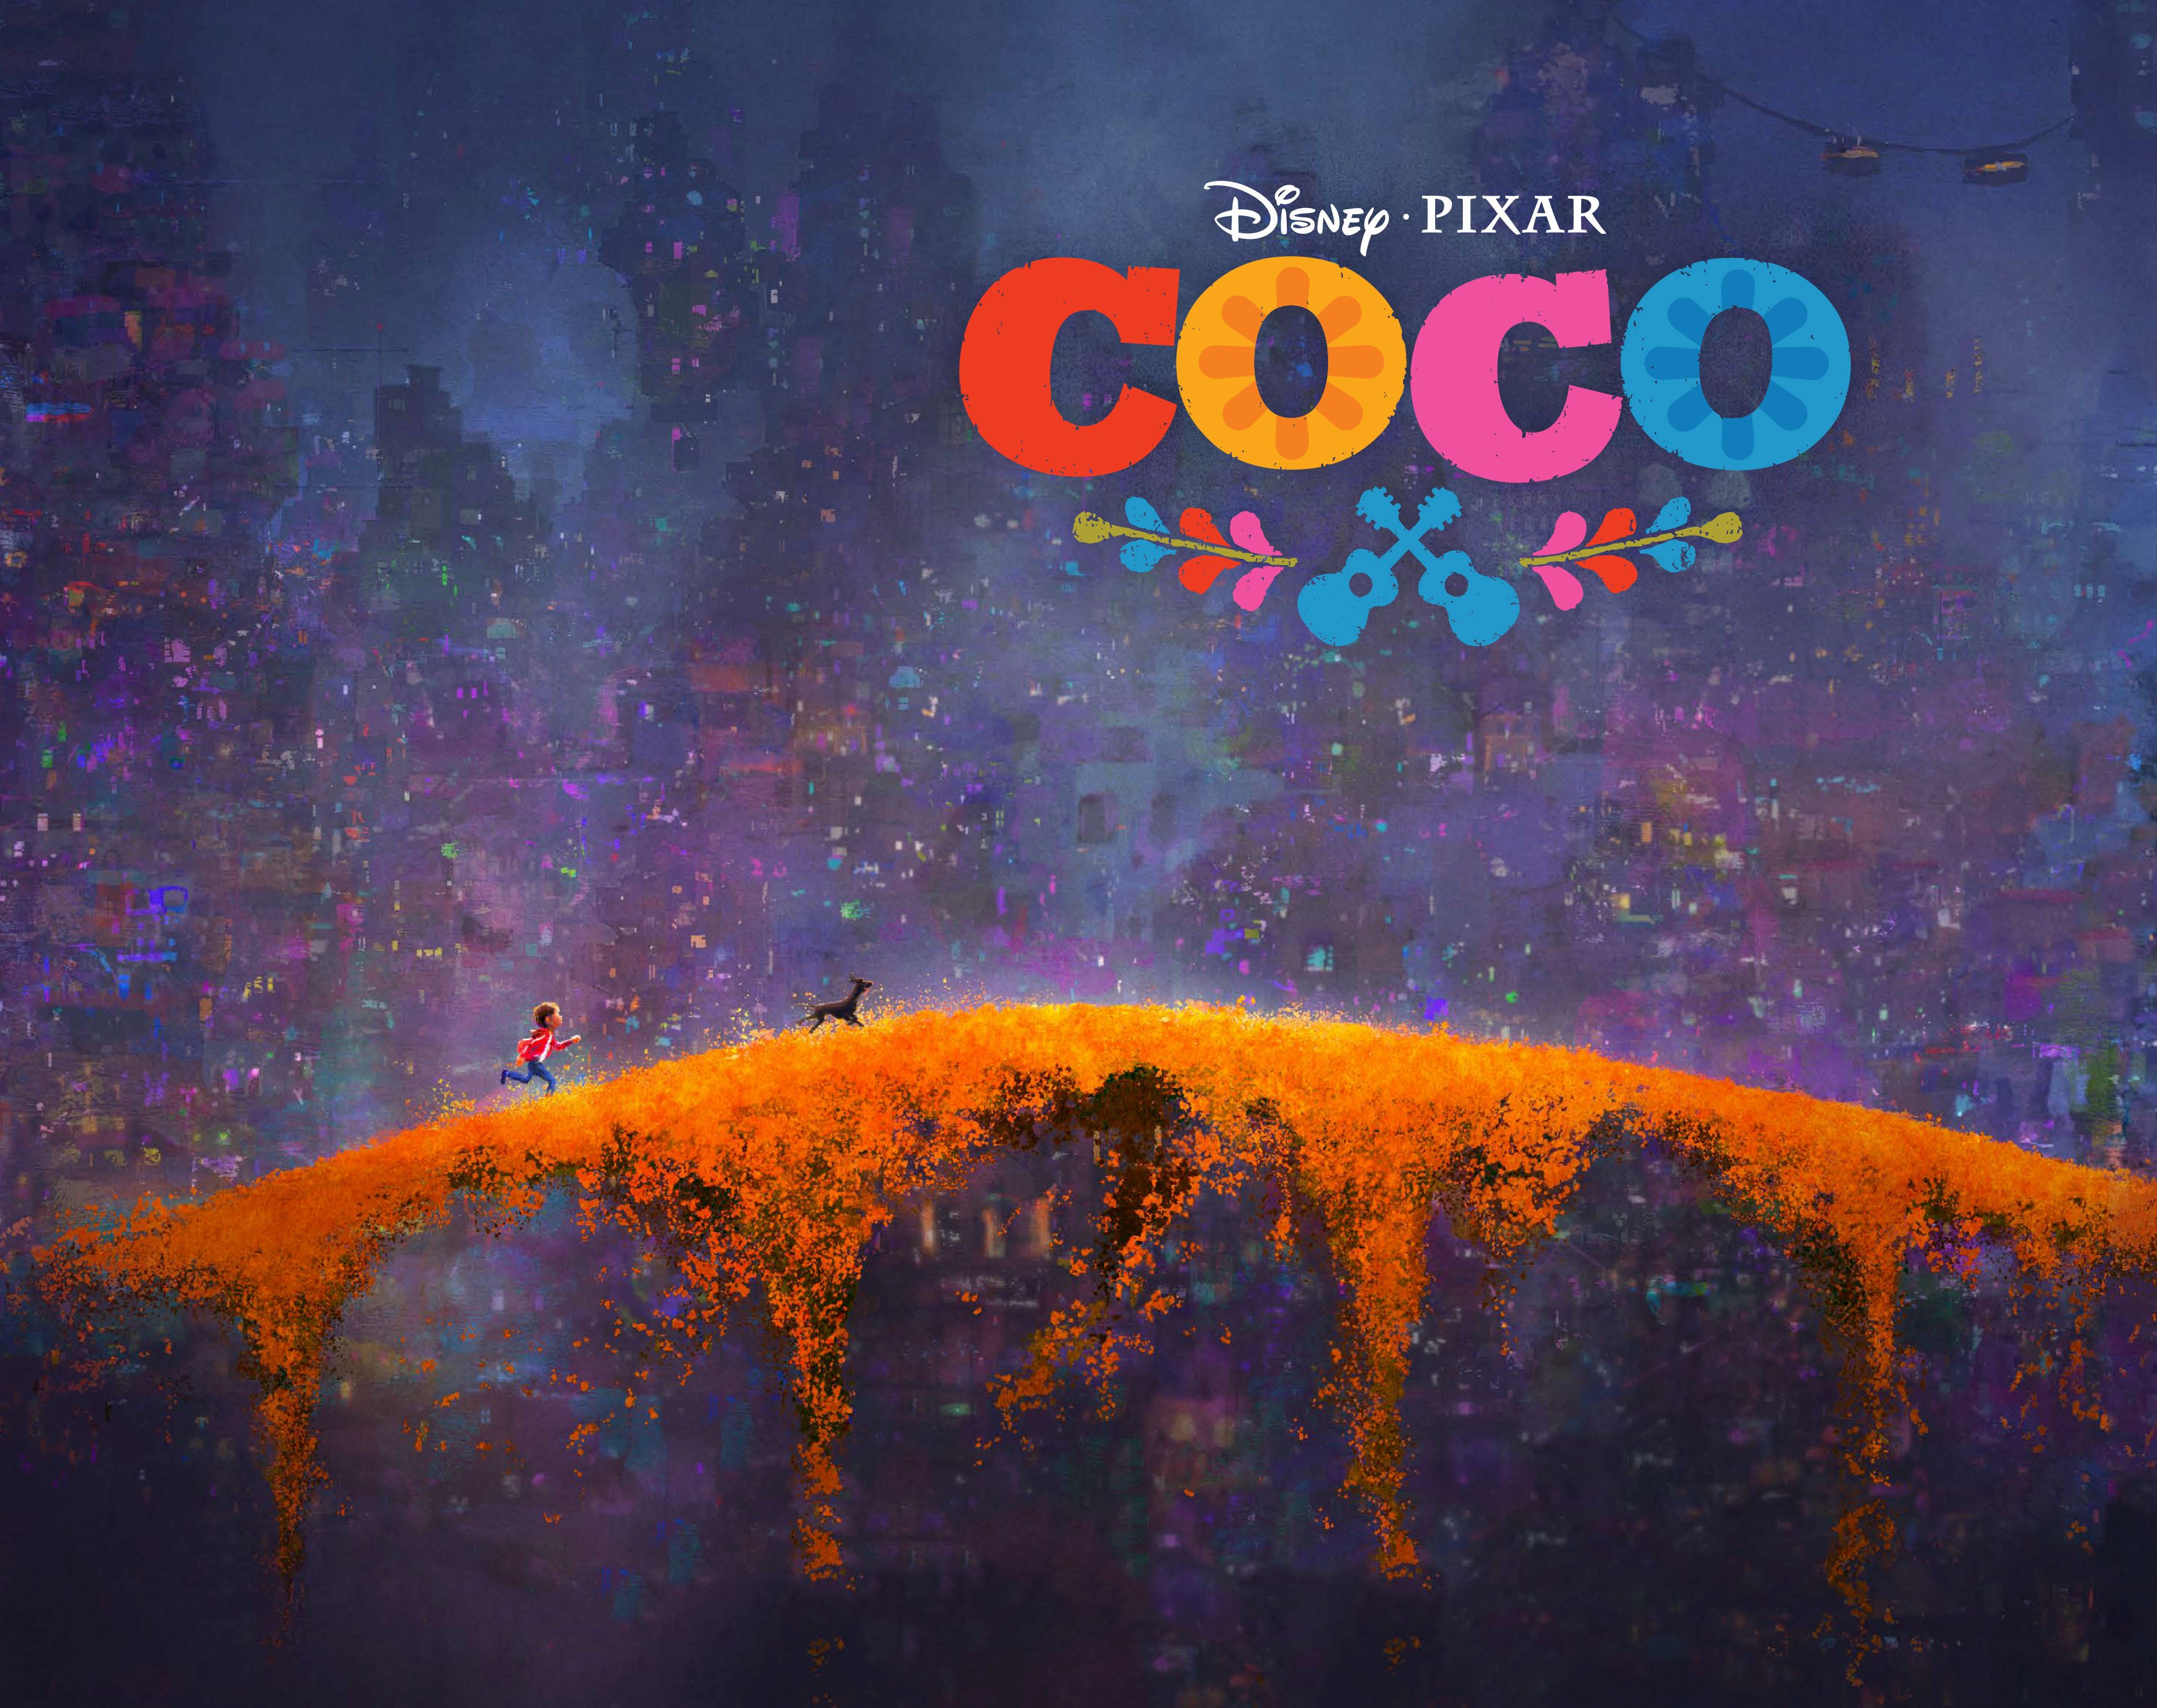 Coco Artwork HD Movies 4k Wallpaper Image Background